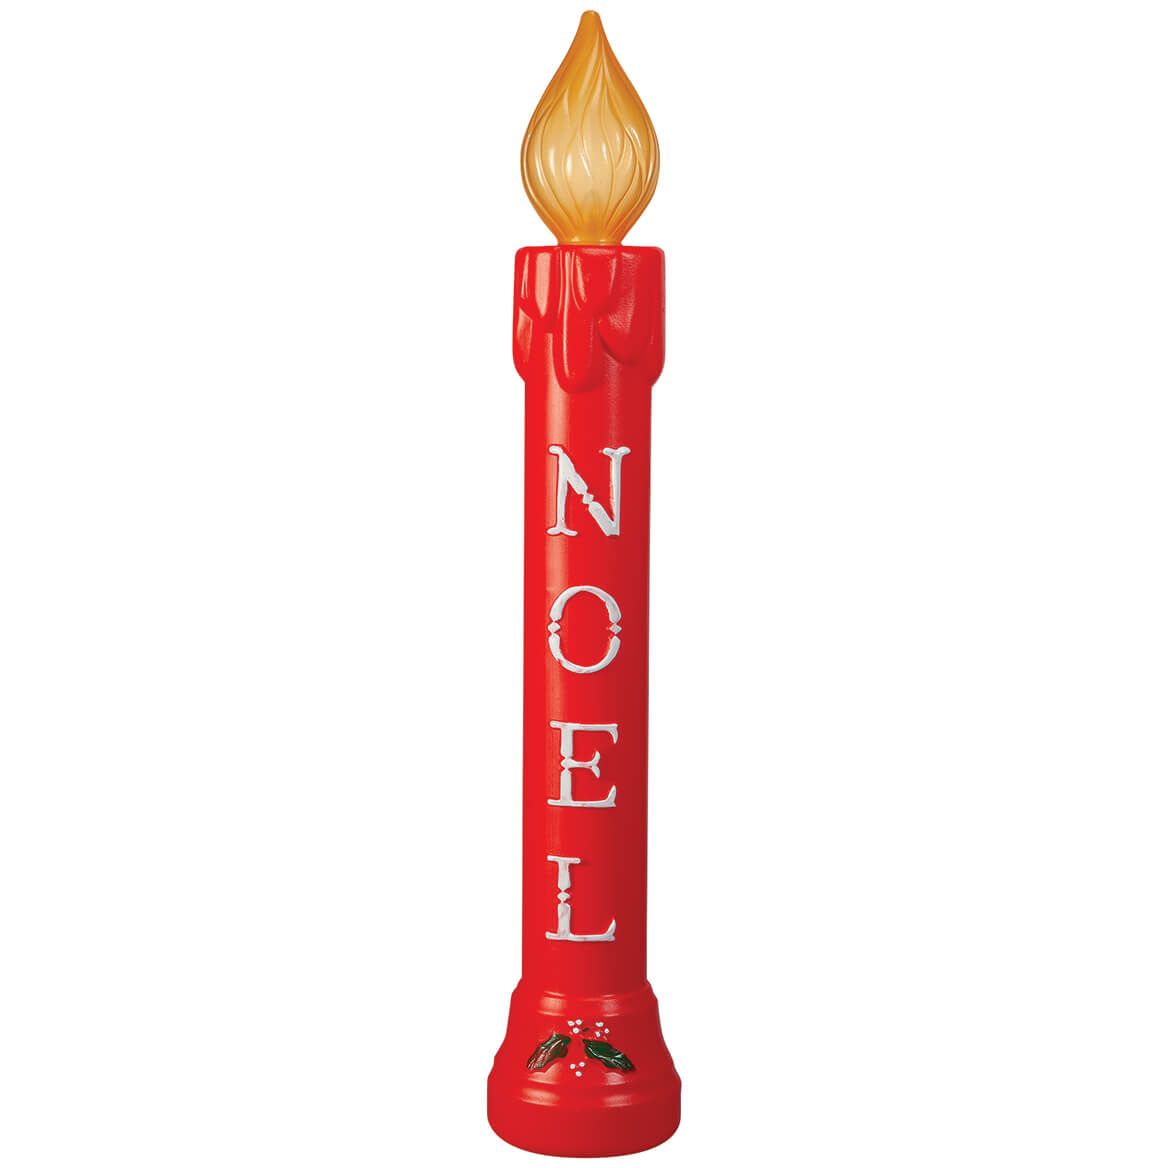 NOEL Candle Lighted Blow Mold + '-' + 375912